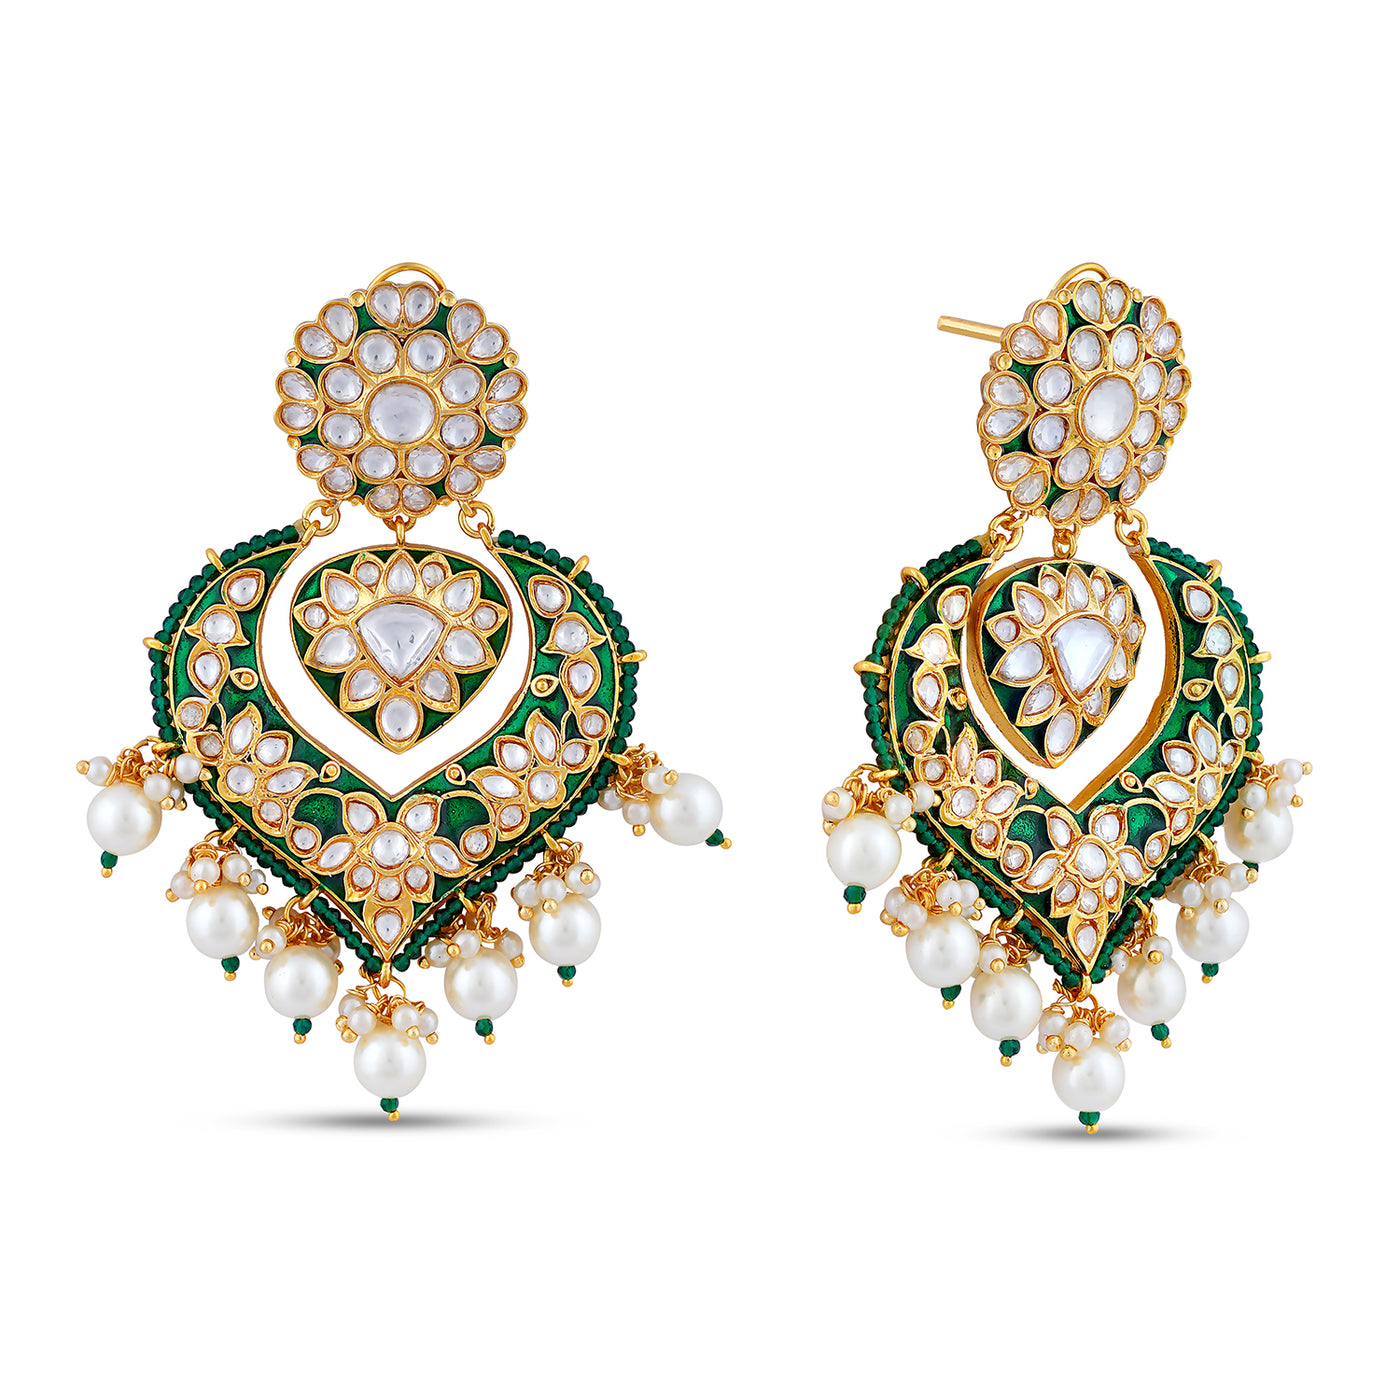 Kundan and Pearl Green Earrings . Front View and Side View showing off meenakari work and pearls.